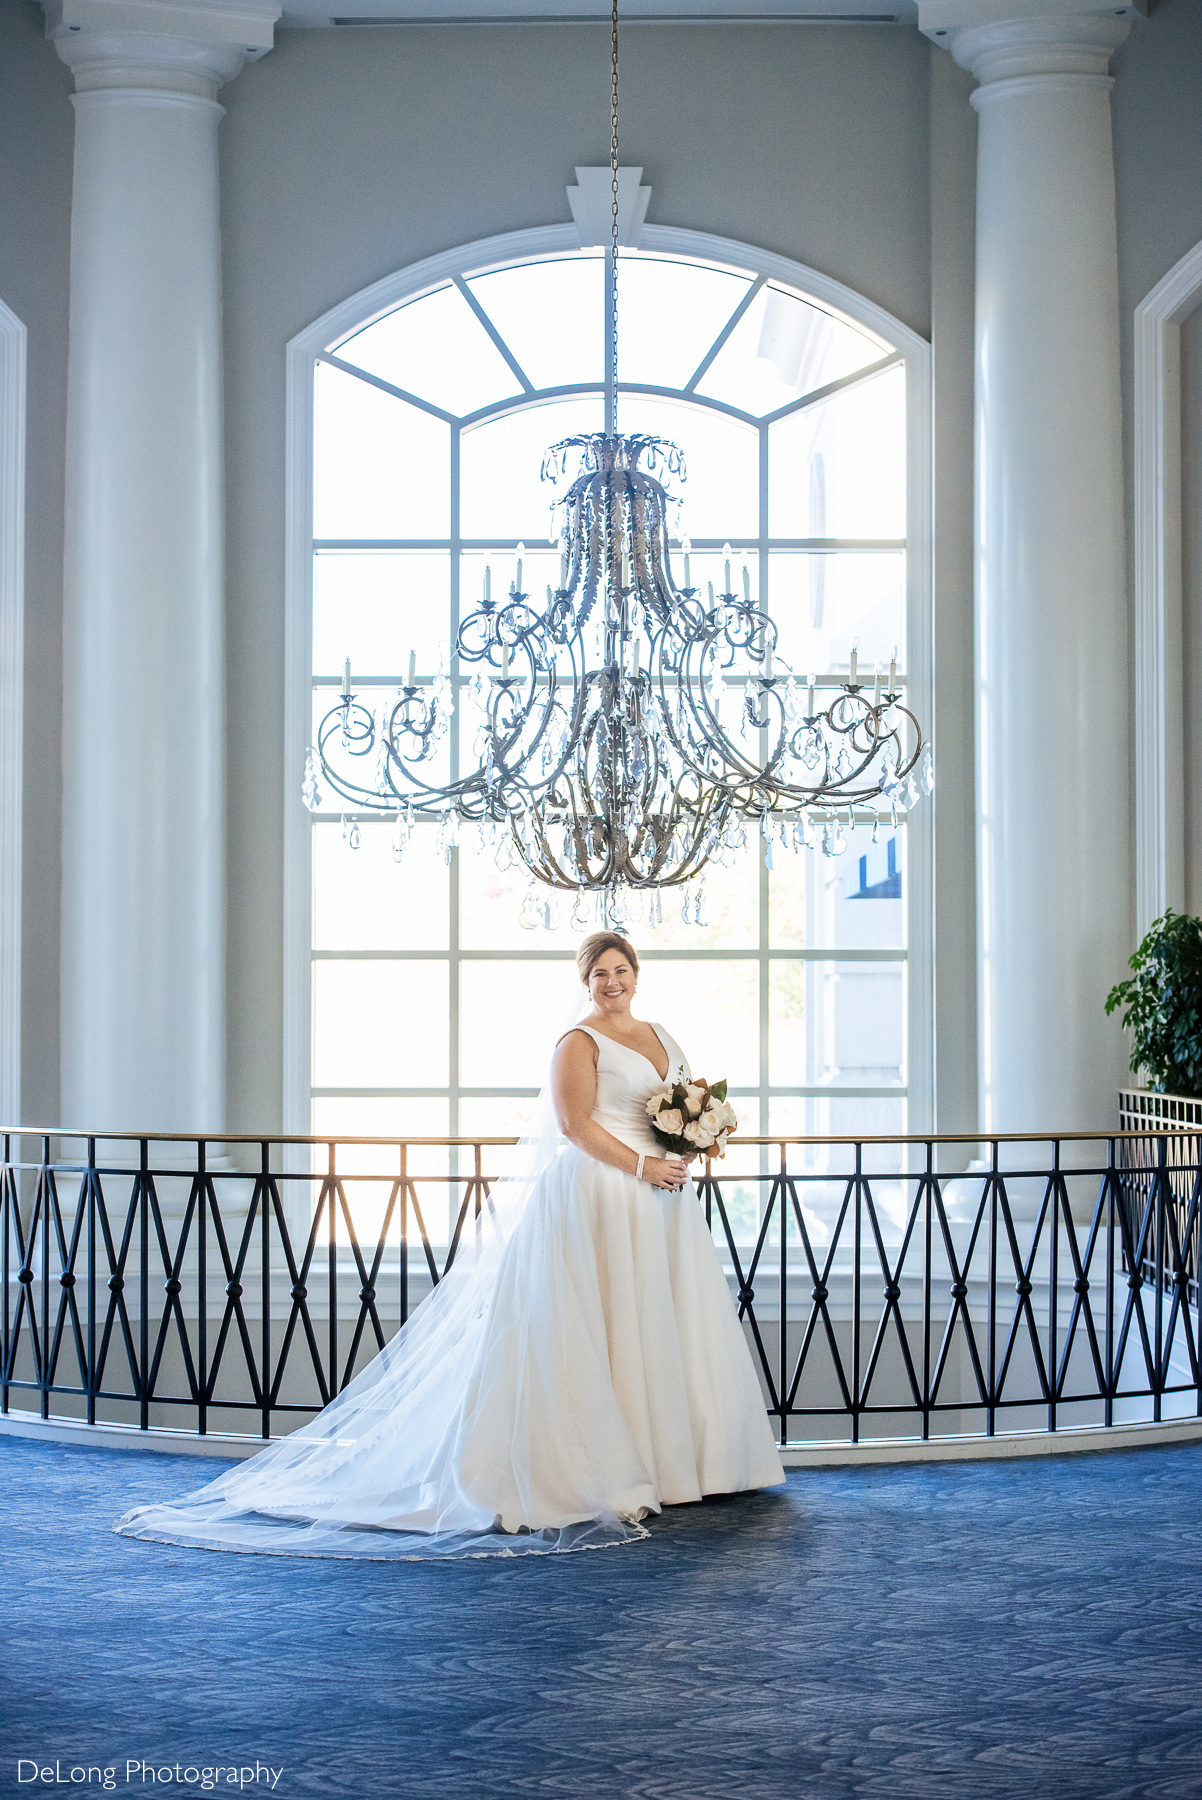 Bridal portrait in front of the chandelier at the Ballantyne Hotel by Charlotte Wedding Photographers DeLong Photography